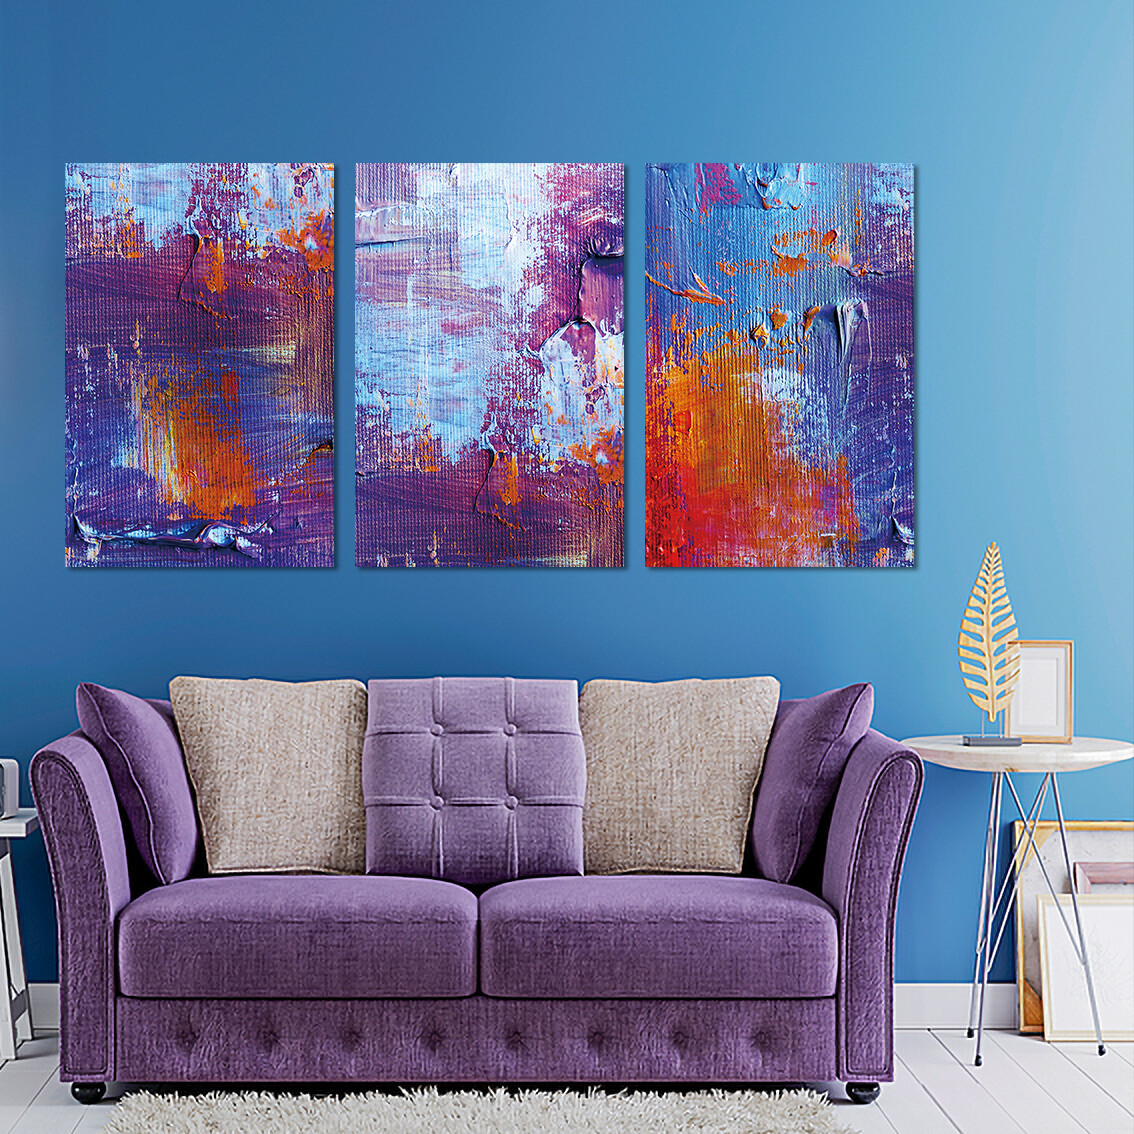 Colour Texture Abstract (Framed) - Modern Luxury Wall art Printed on Acrylic Glass - Framed and Ready to Hang 